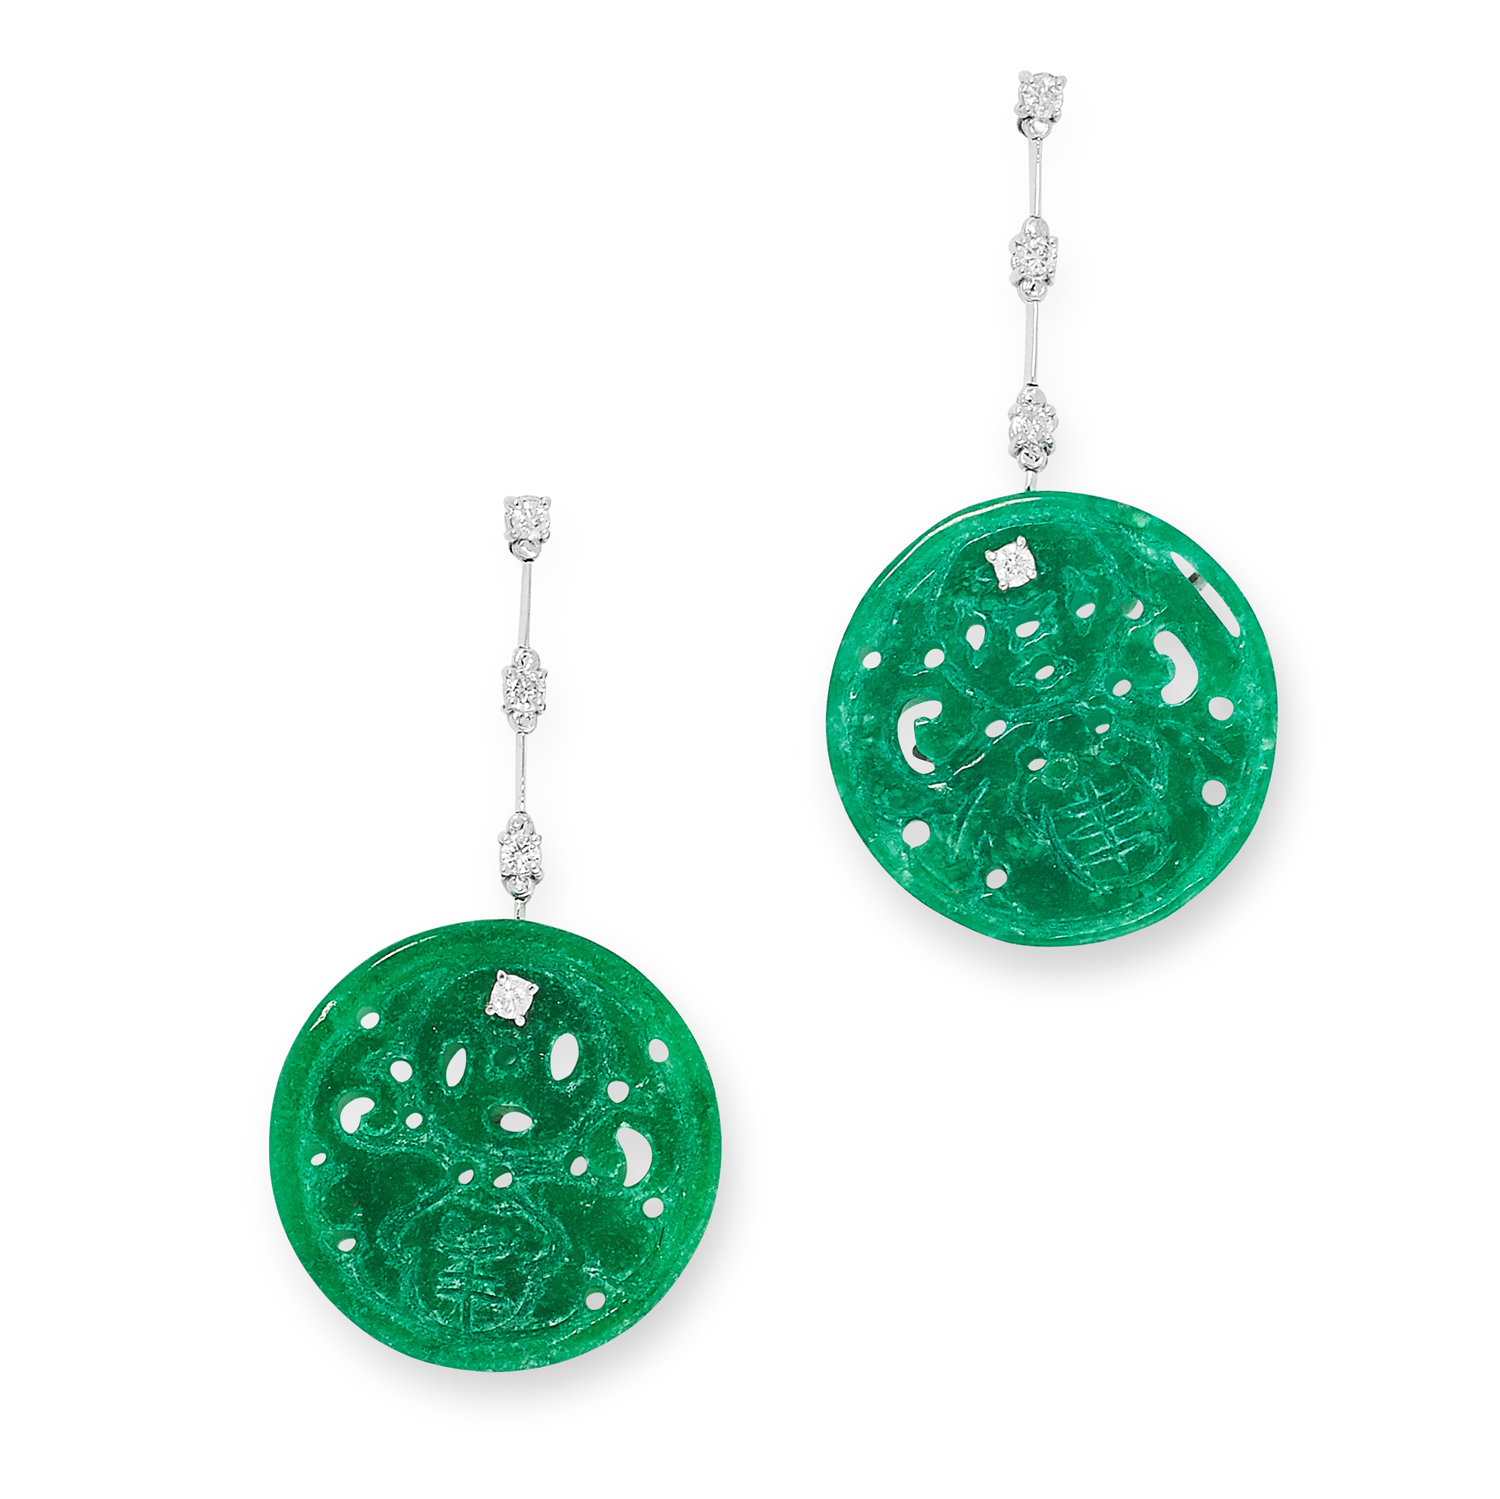 A PAIR OF CARVED JADEITE JADE AND DIAMOND EARRINGS set with round carved jadeite jade discs and